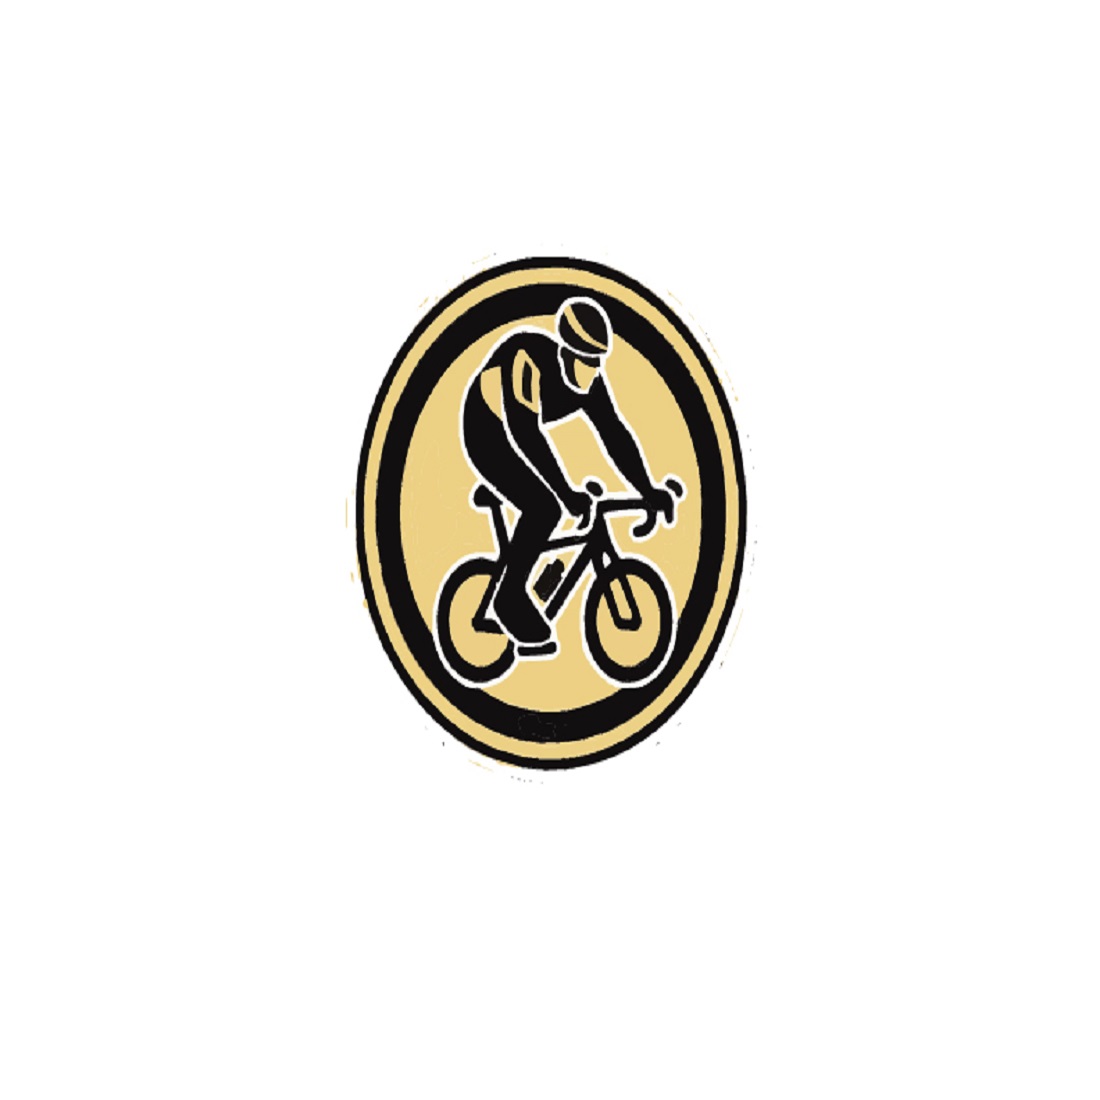 Gold and black logo depicting a cyclist in action preview image.